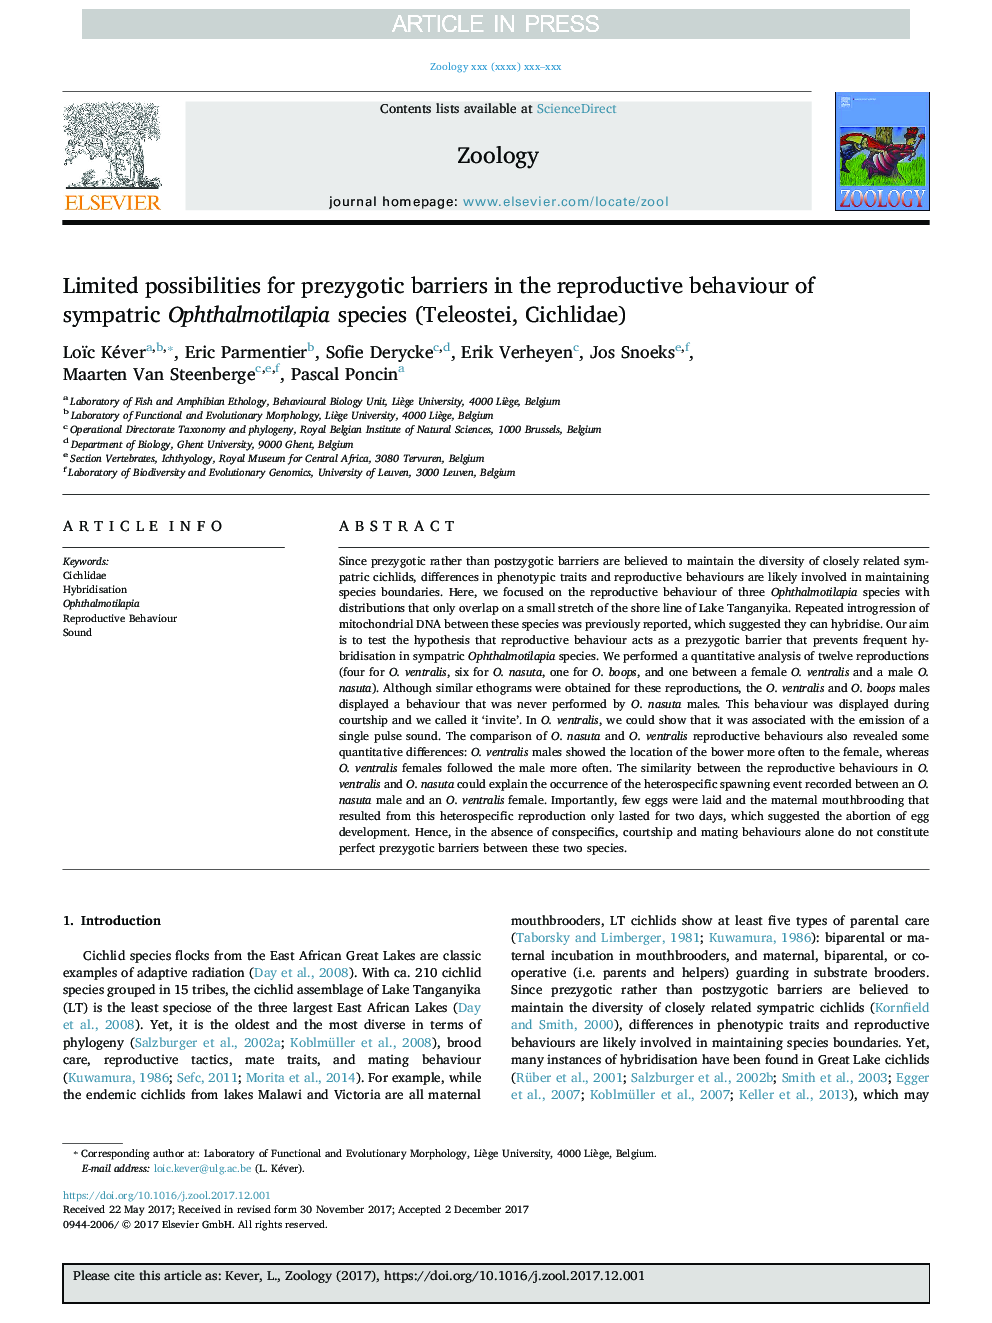 Limited possibilities for prezygotic barriers in the reproductive behaviour of sympatric Ophthalmotilapia species (Teleostei, Cichlidae)